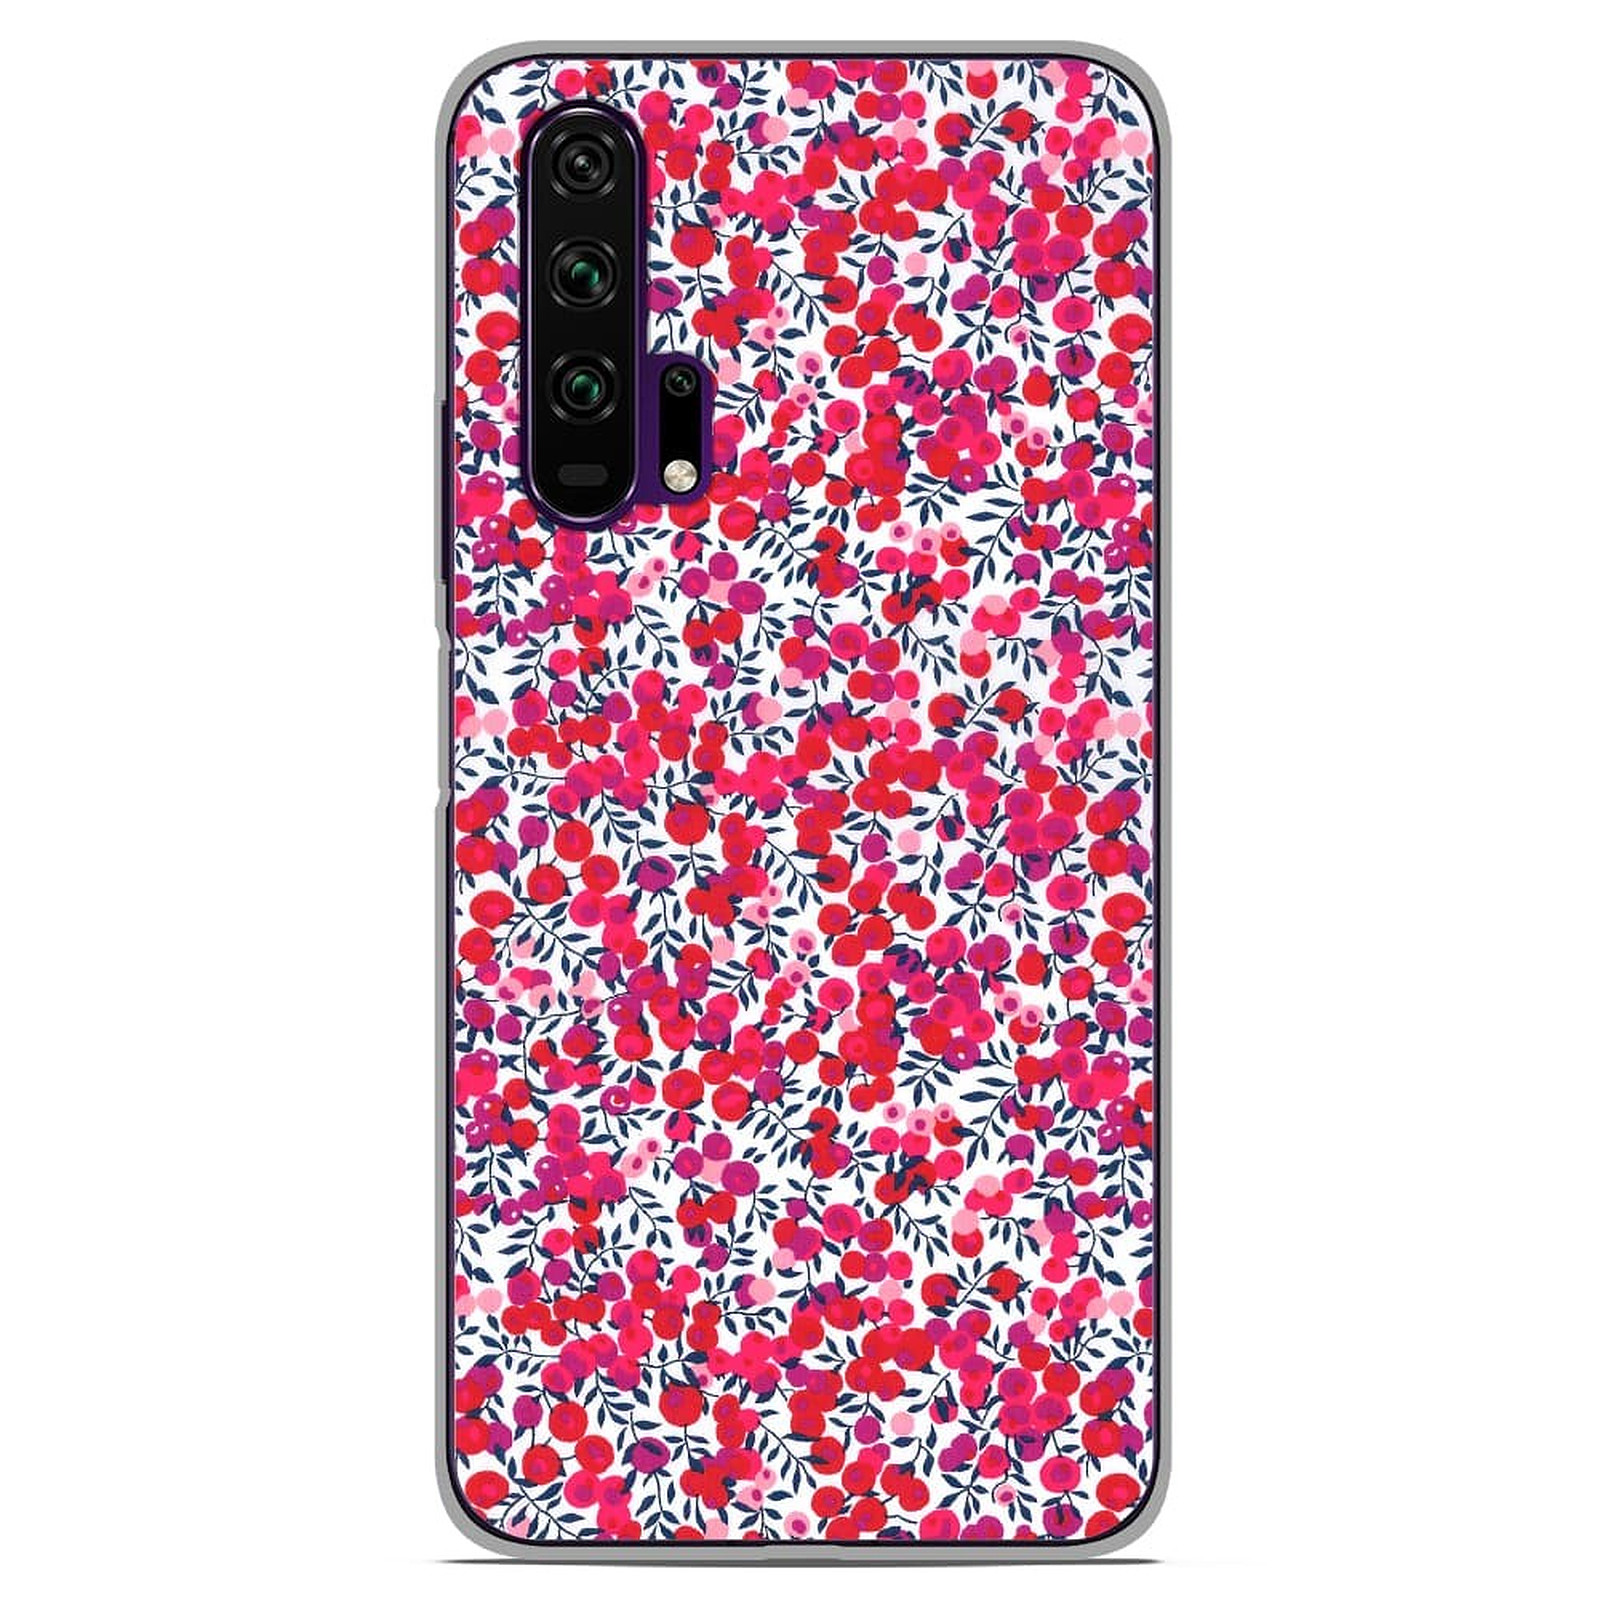 1001 Coques Coque silicone gel Huawei Honor 20 Pro motif Liberty Wiltshire Rouge - Coque telephone 1001Coques